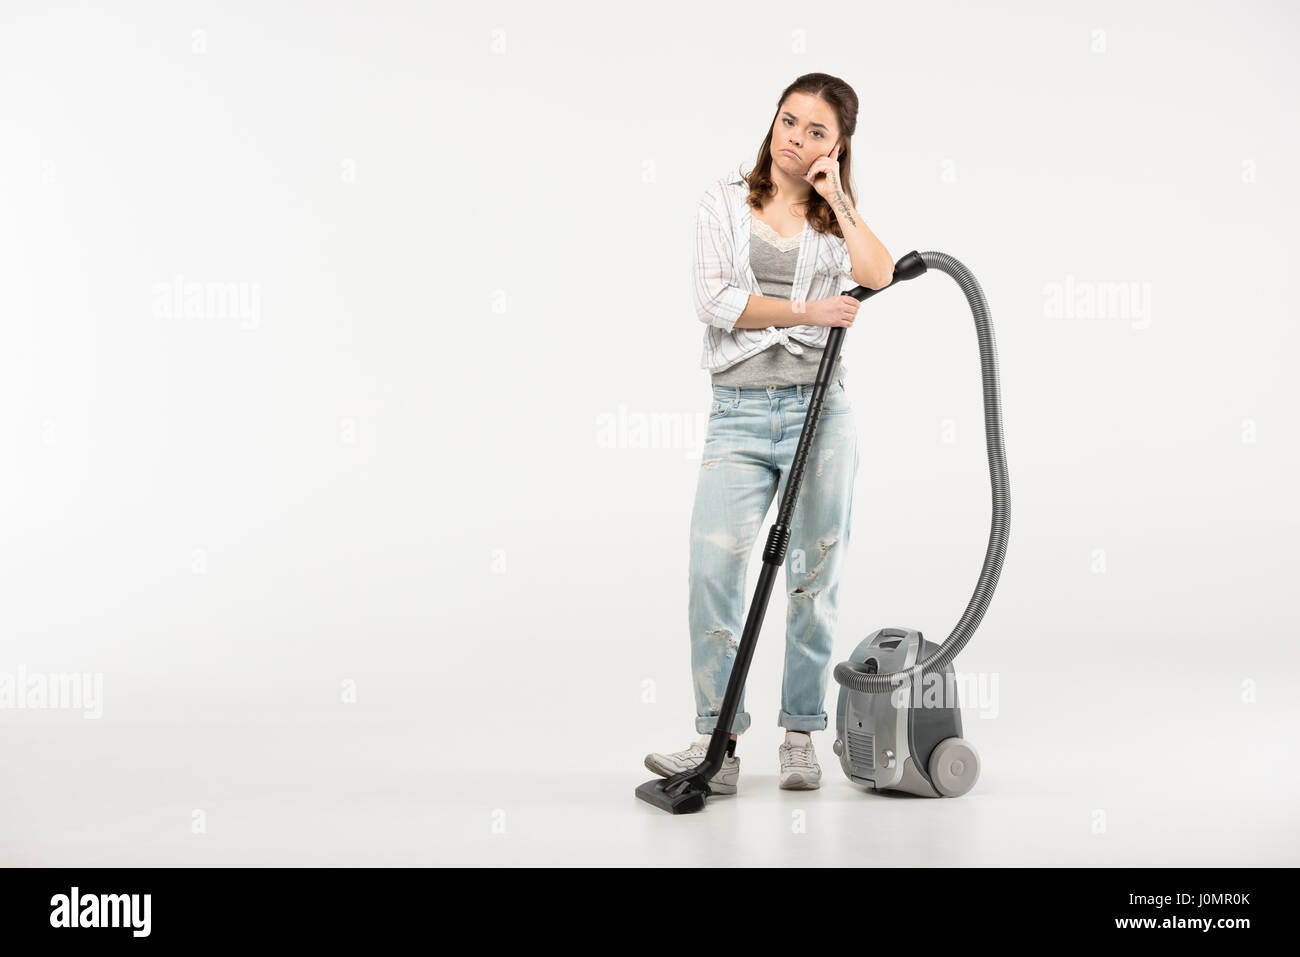 Thoughtful young woman standing with vacuum cleaner on grey Stock Photo